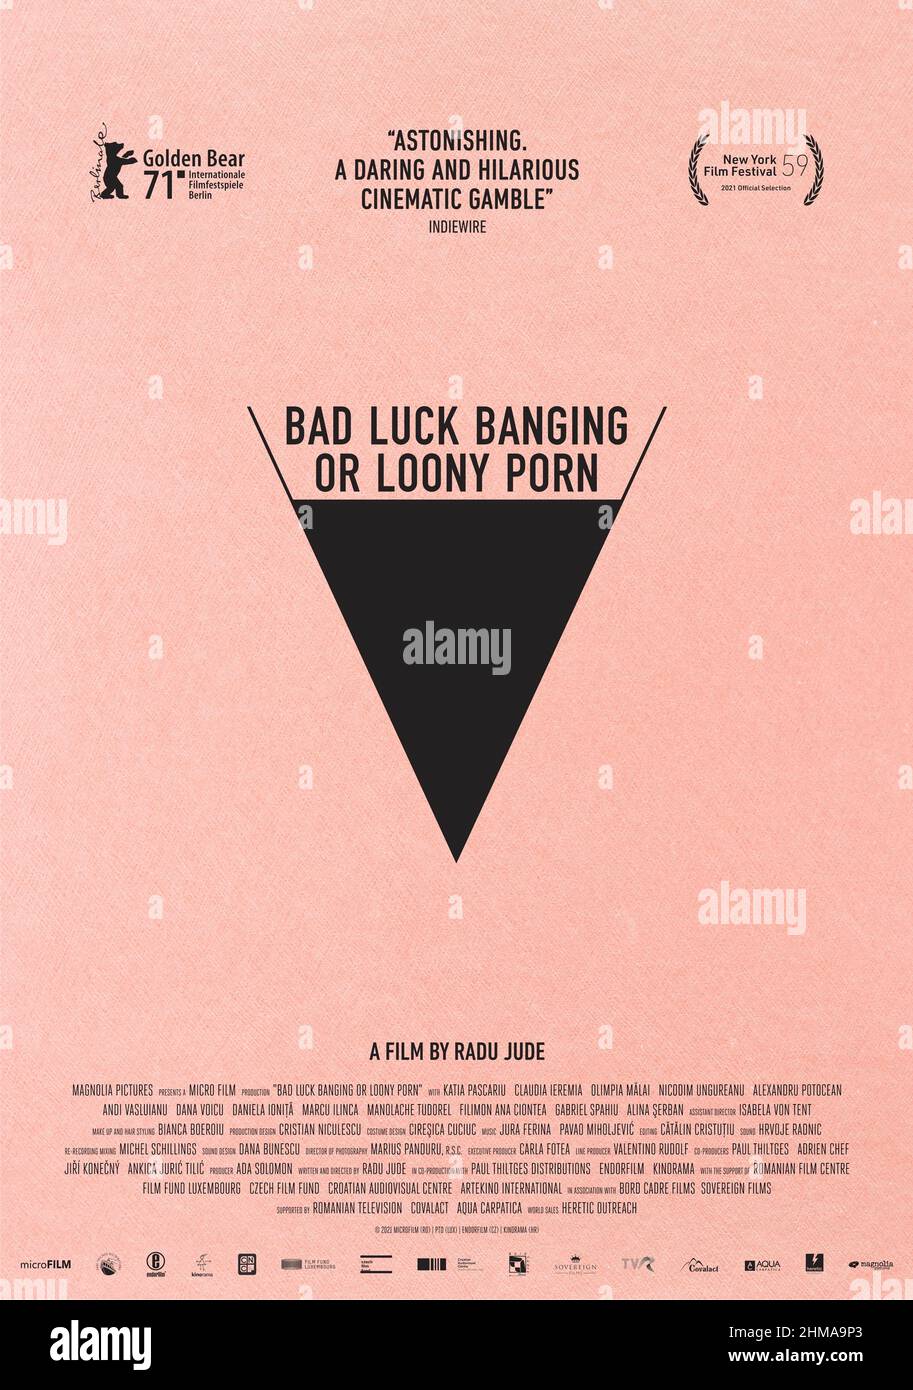 Bad Luck Banging or Loony Porn (2020) directed by Radu Jude and starring Katia Pascariu, Claudia Ieremia and Olimpia Ma. Emi, a school teacher, finds her career and reputation under threat after a personal sex tape is leaked on the Internet. Forced to meet the parents demanding her dismissal, Emi refuses to surrender to their pressure. Stock Photo